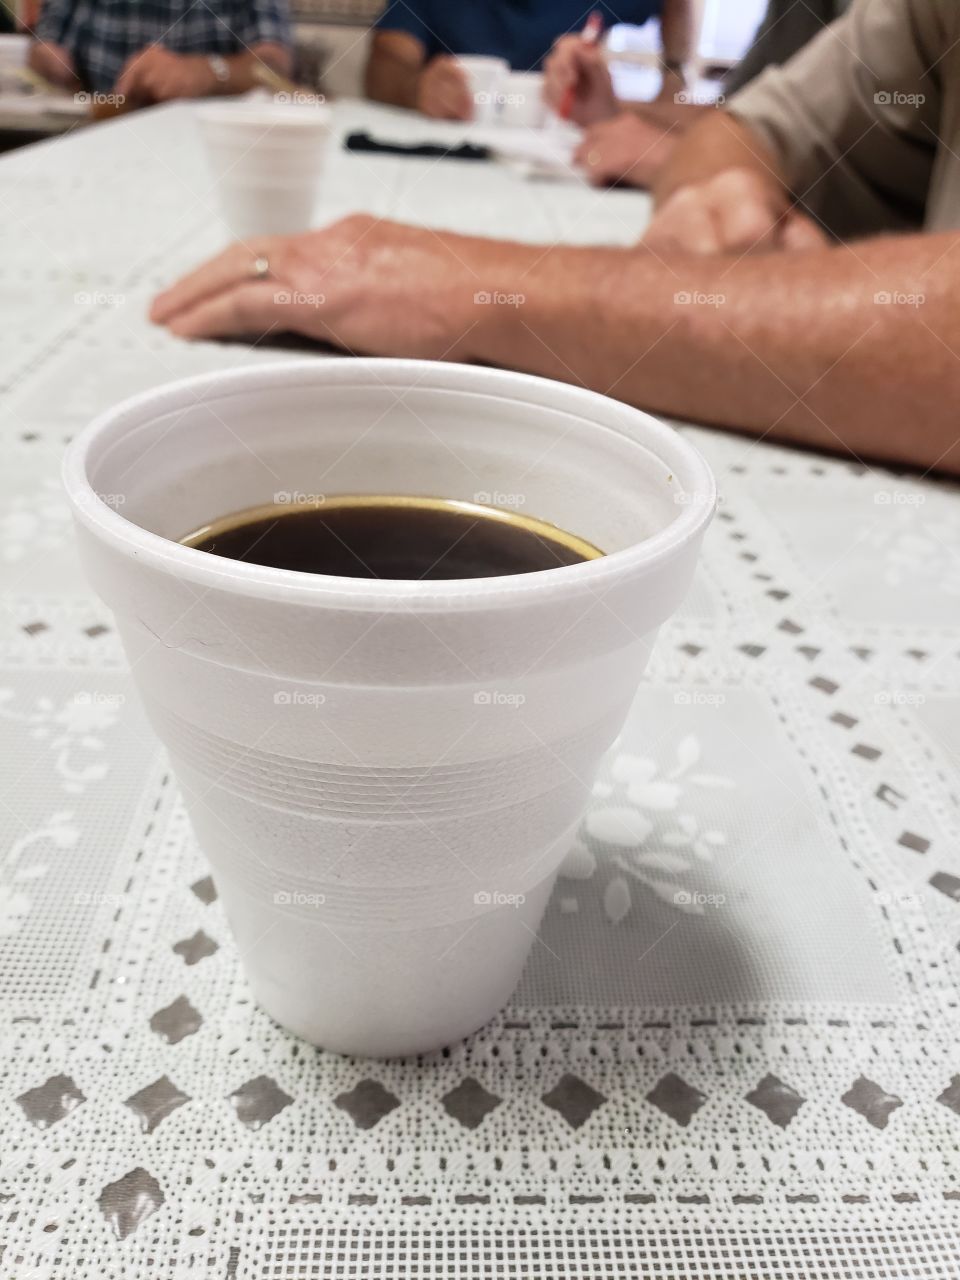 Coffee in a styrofoam Foap sitting on a table during a social gathering